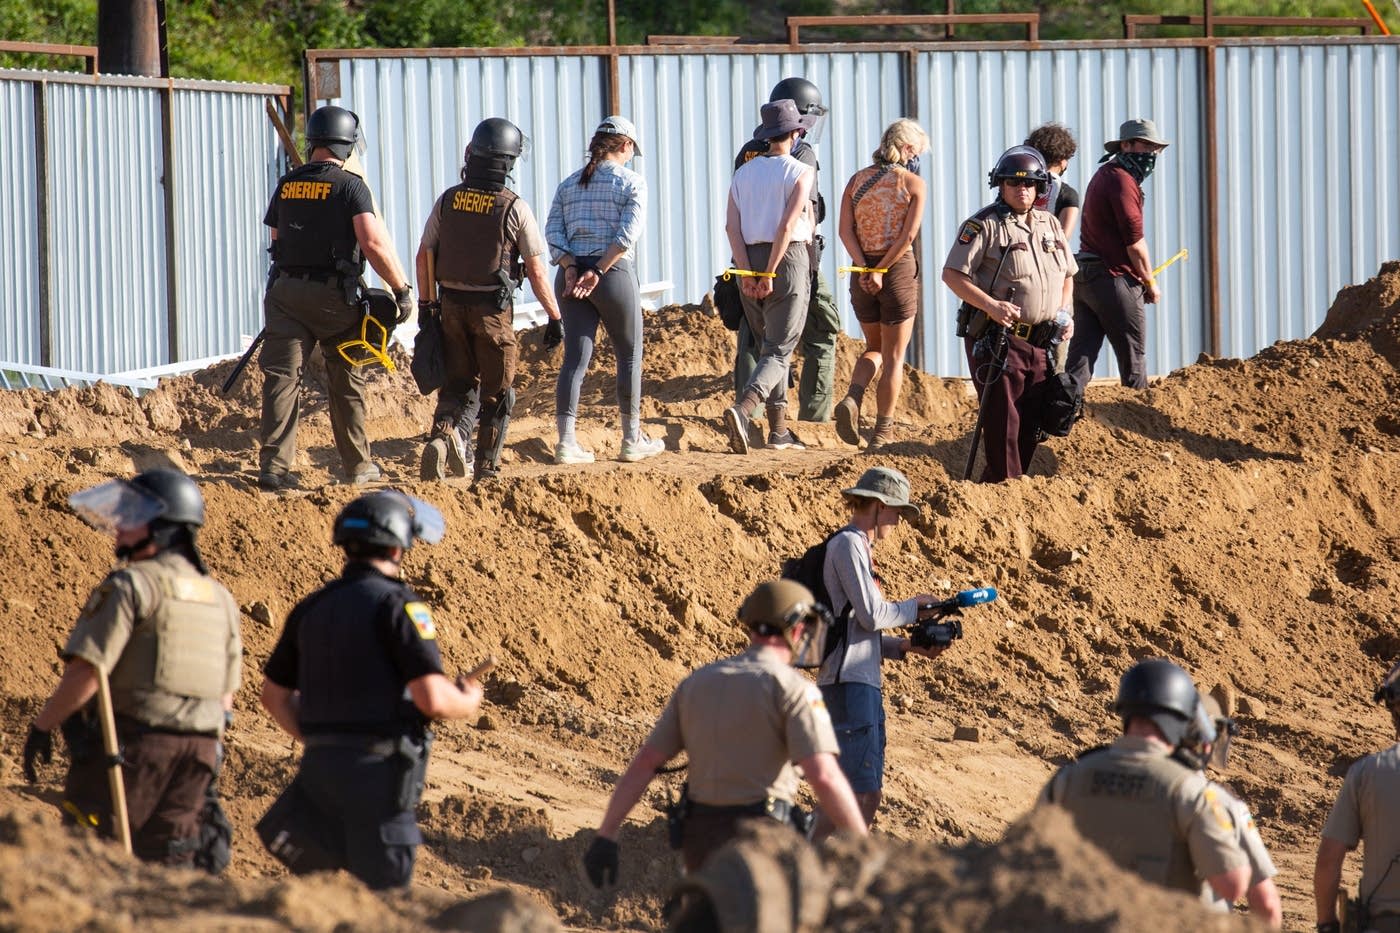 a dirt construction site. a row of protestors handcuffed are being escorted off the property by police officers